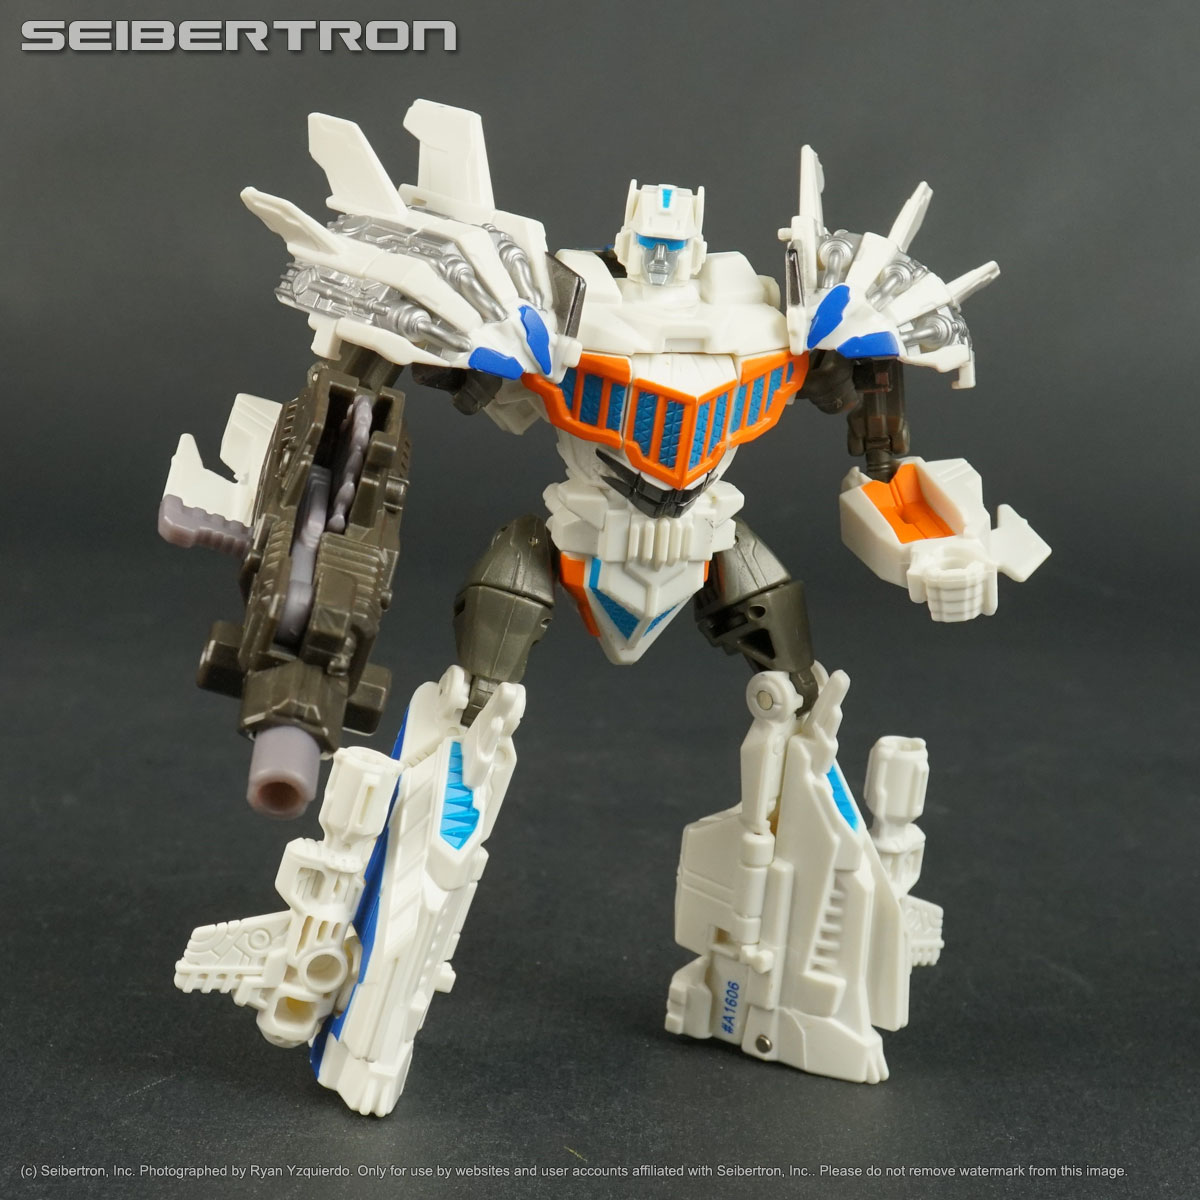 TOPSPIN Transformer Generations Fall of Cybertron complete Hasbro 2013 221013A